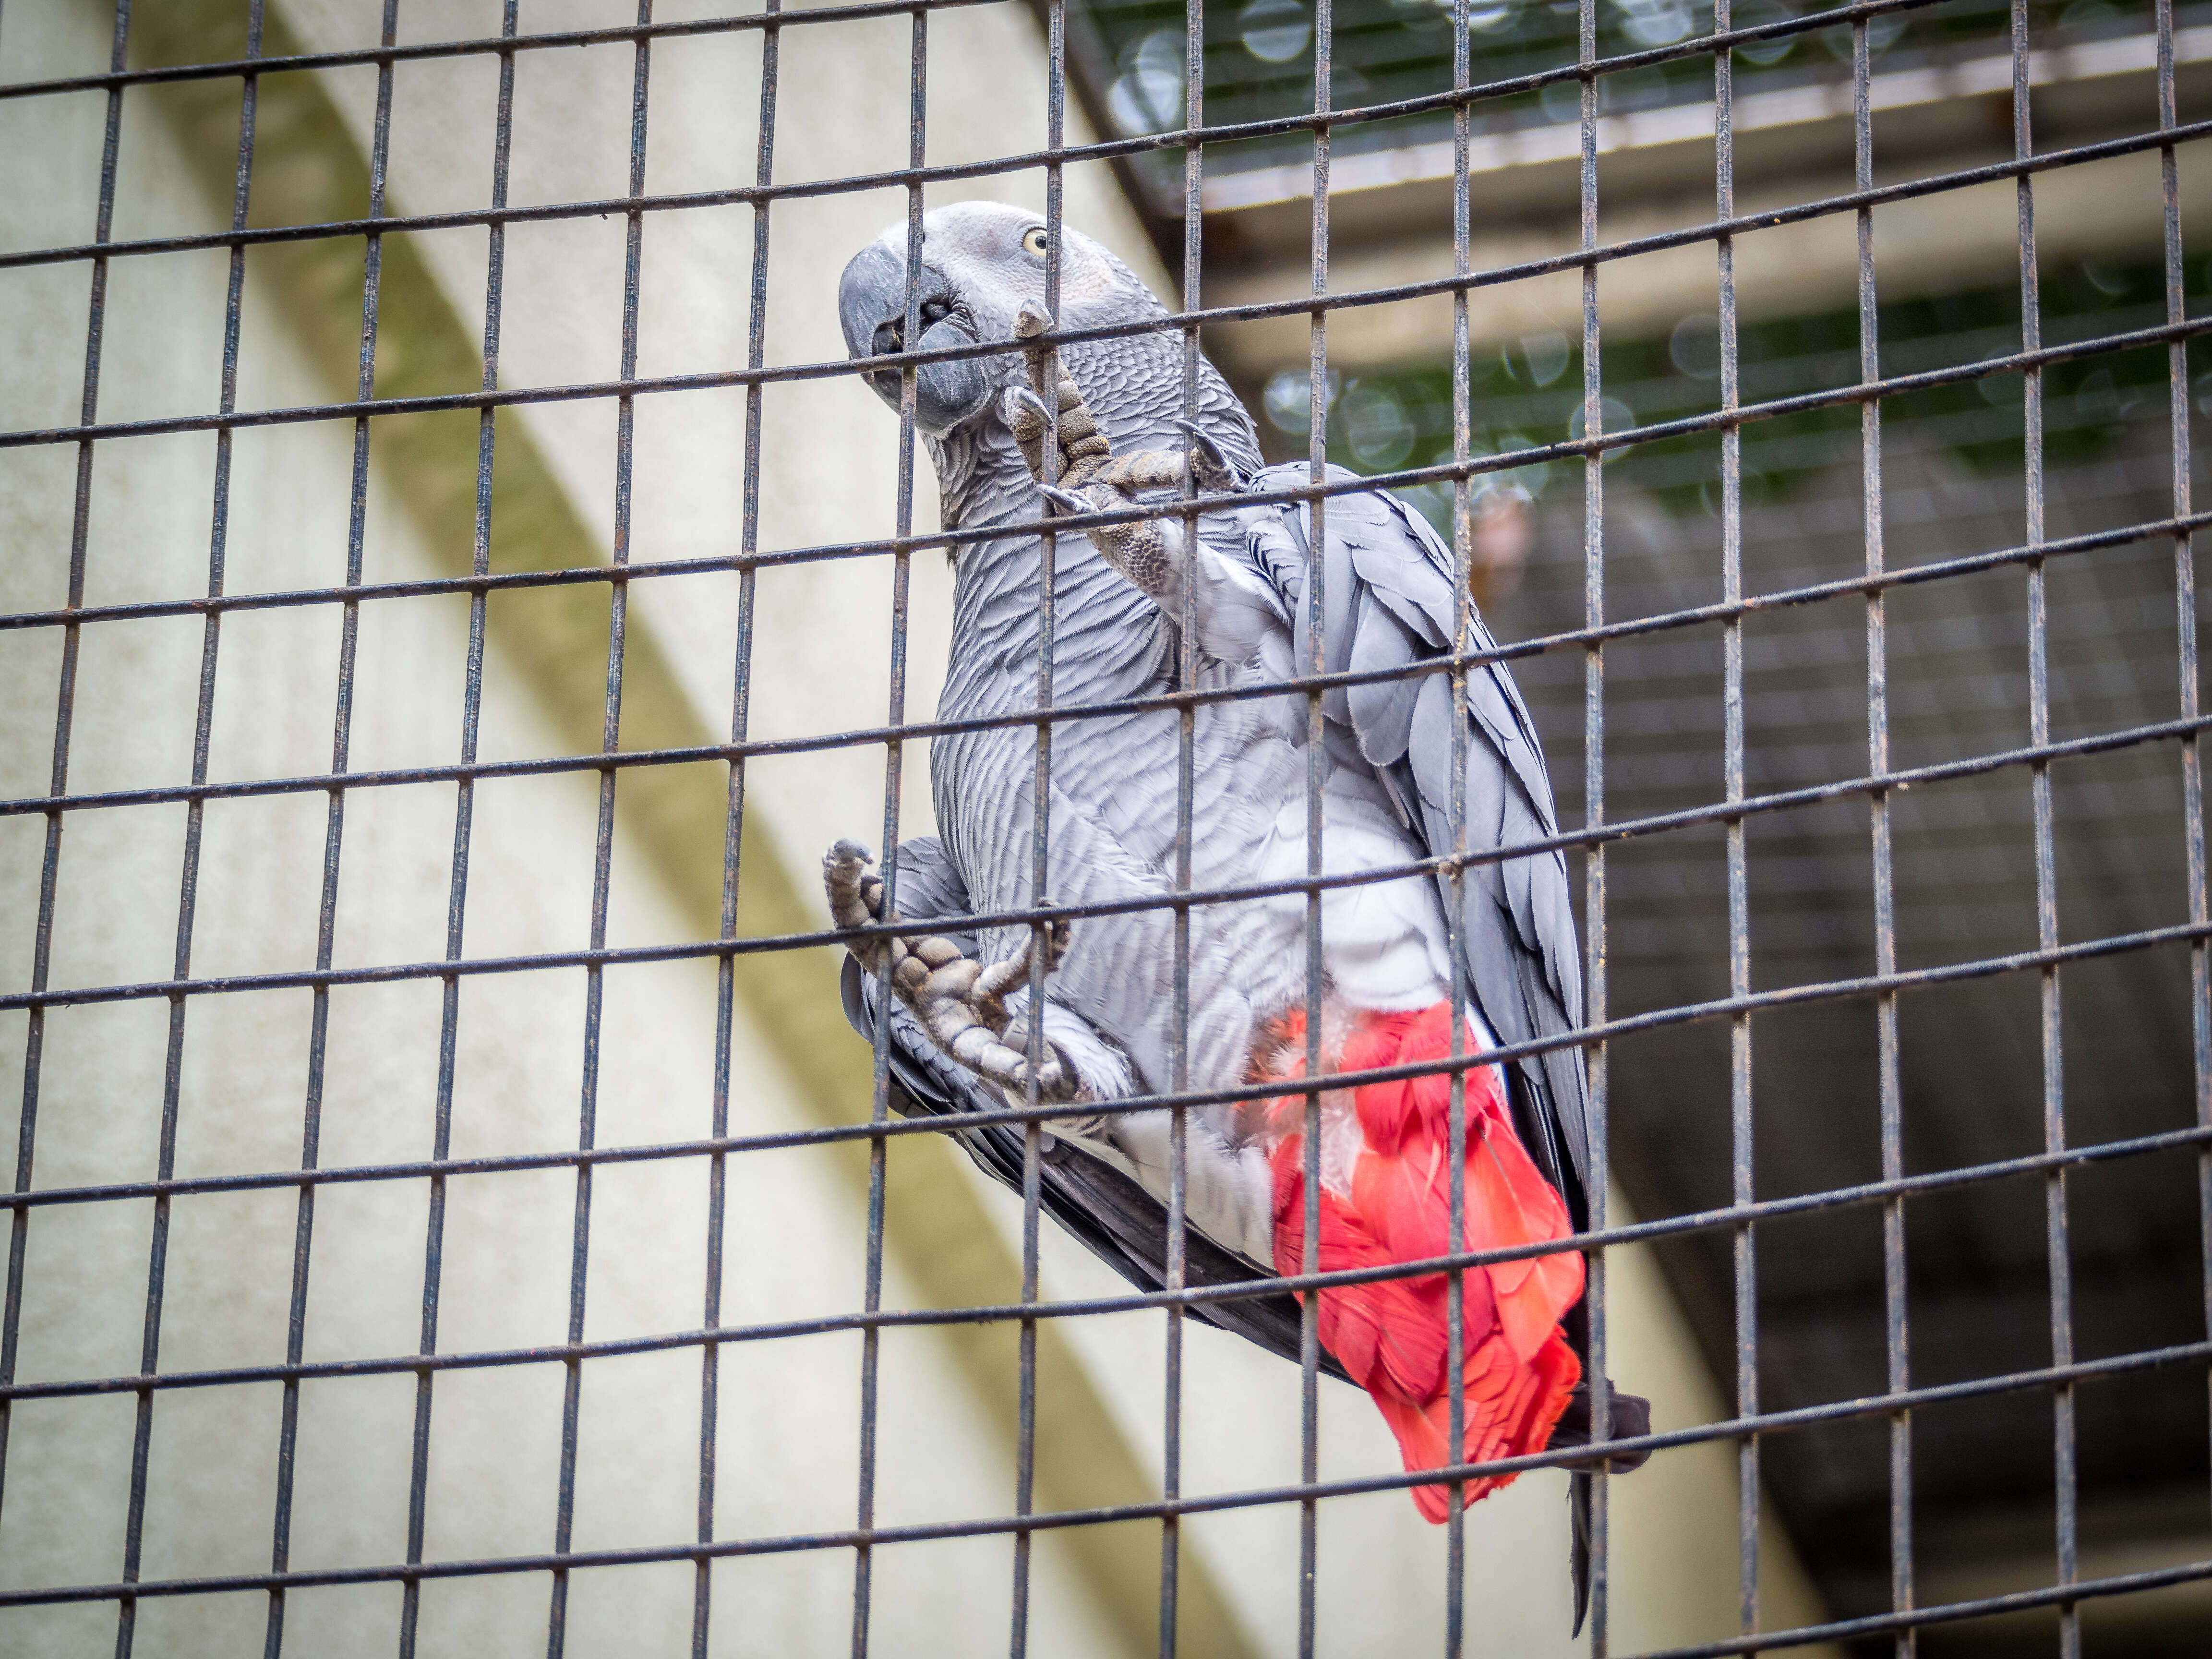 Caged African grey parrot